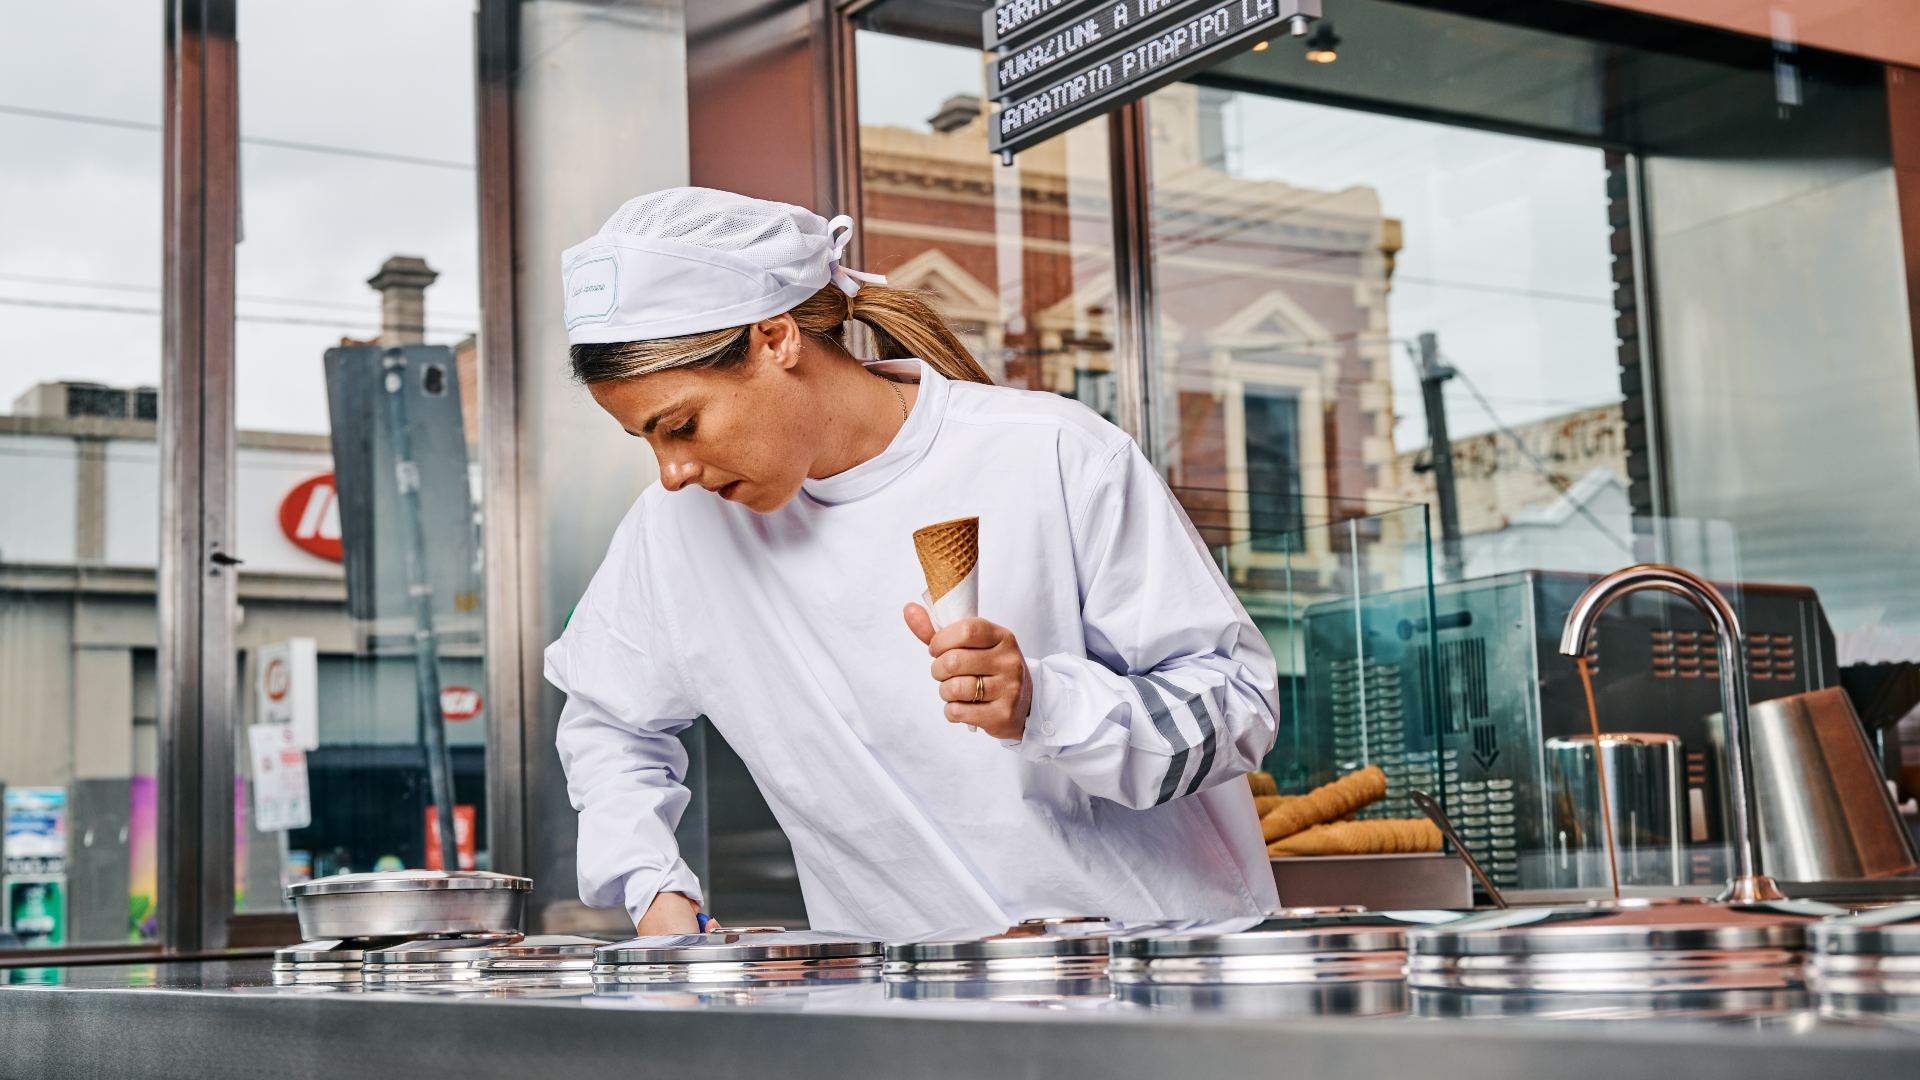 Pidapipo Just Opened a Shiny New Flagship Gelateria and Experimentation Lab in Fitzroy